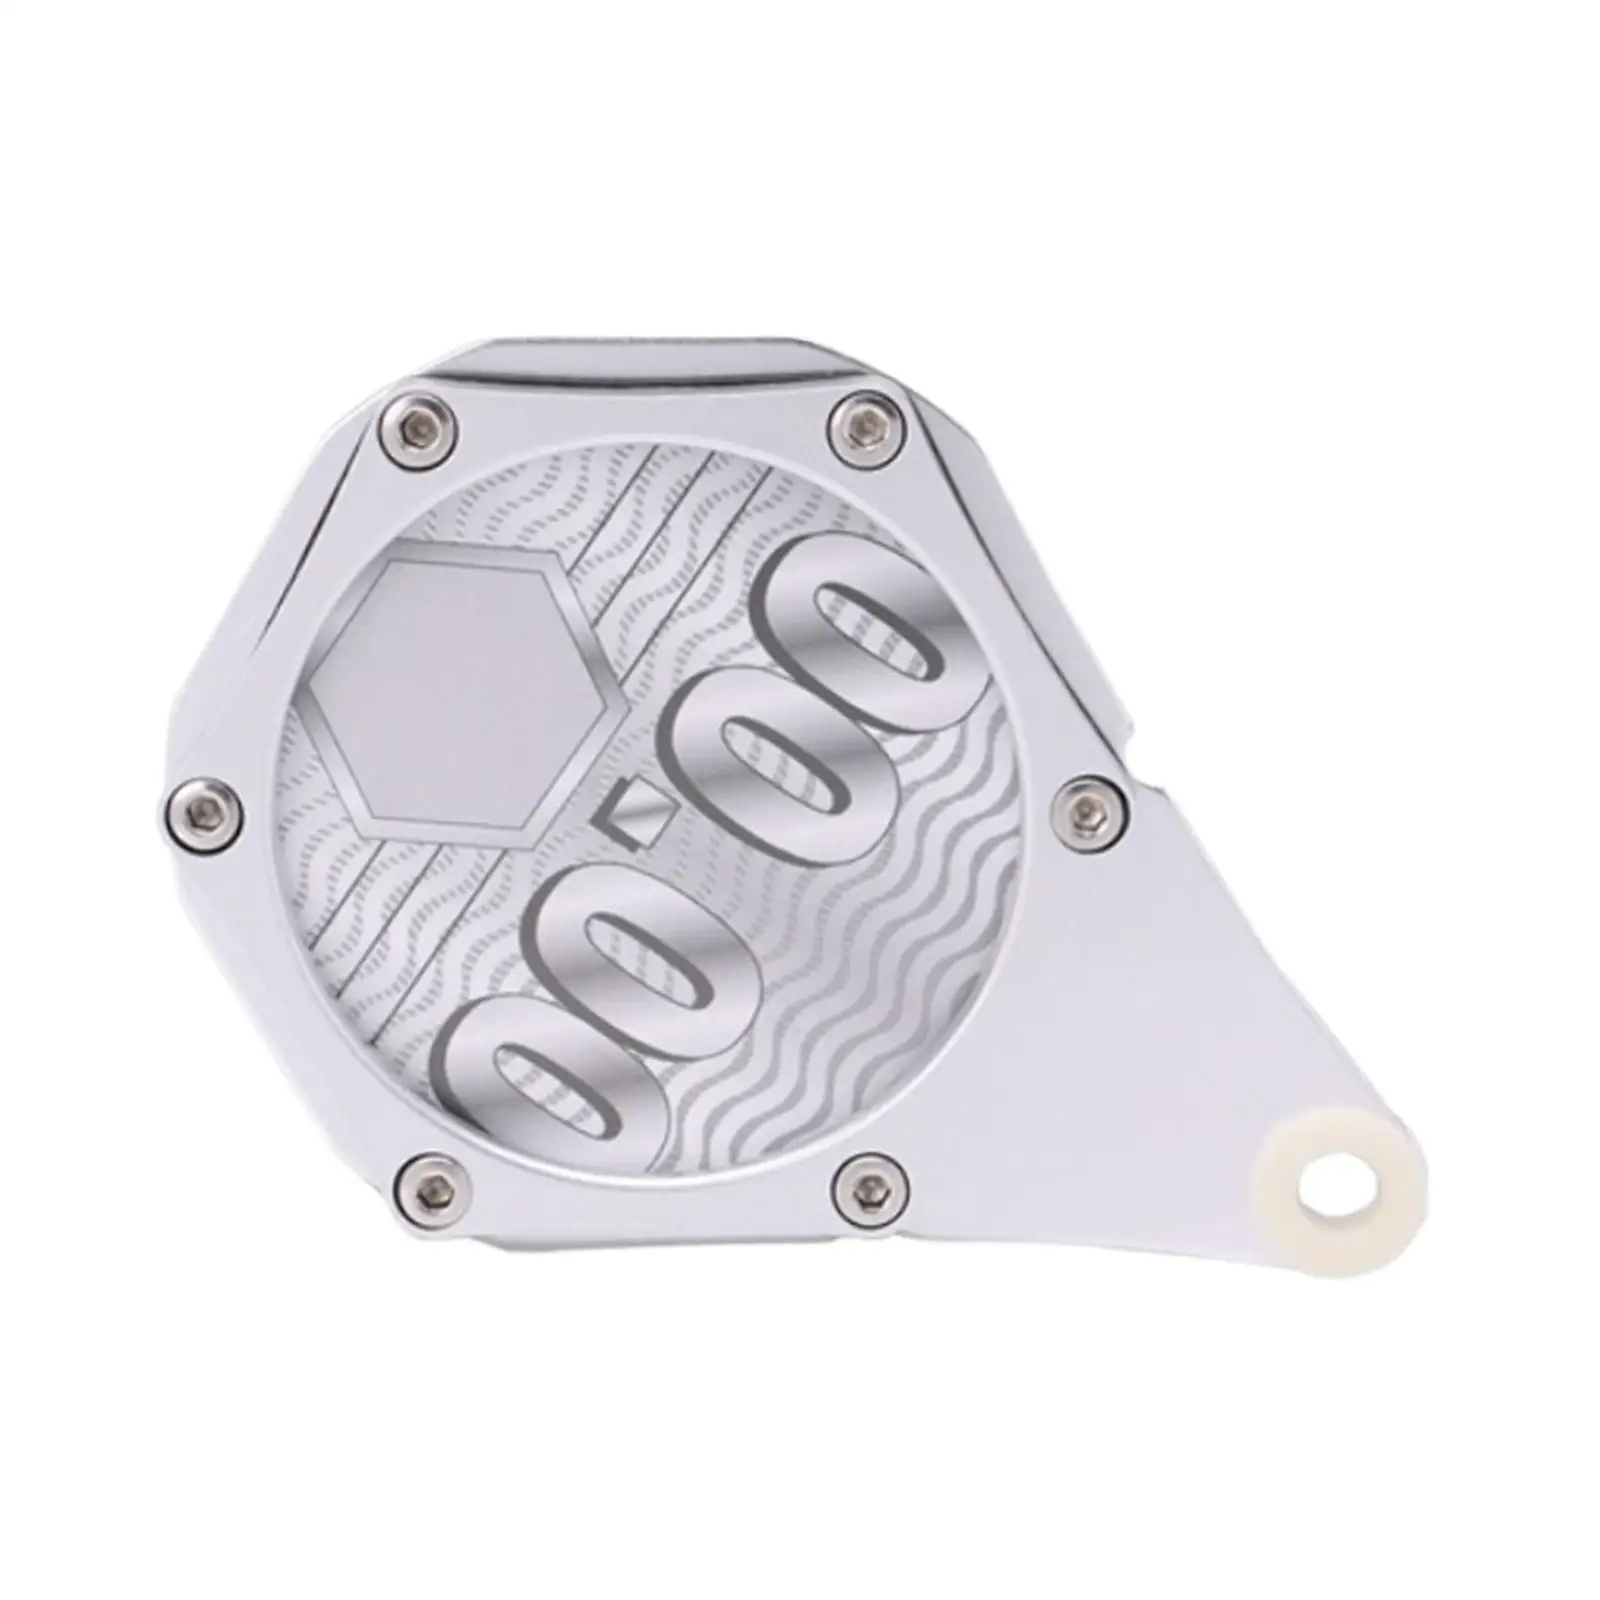 Tax Disc Plate Universal Water Resistant Motorcycle Supplies for Motor Scooter